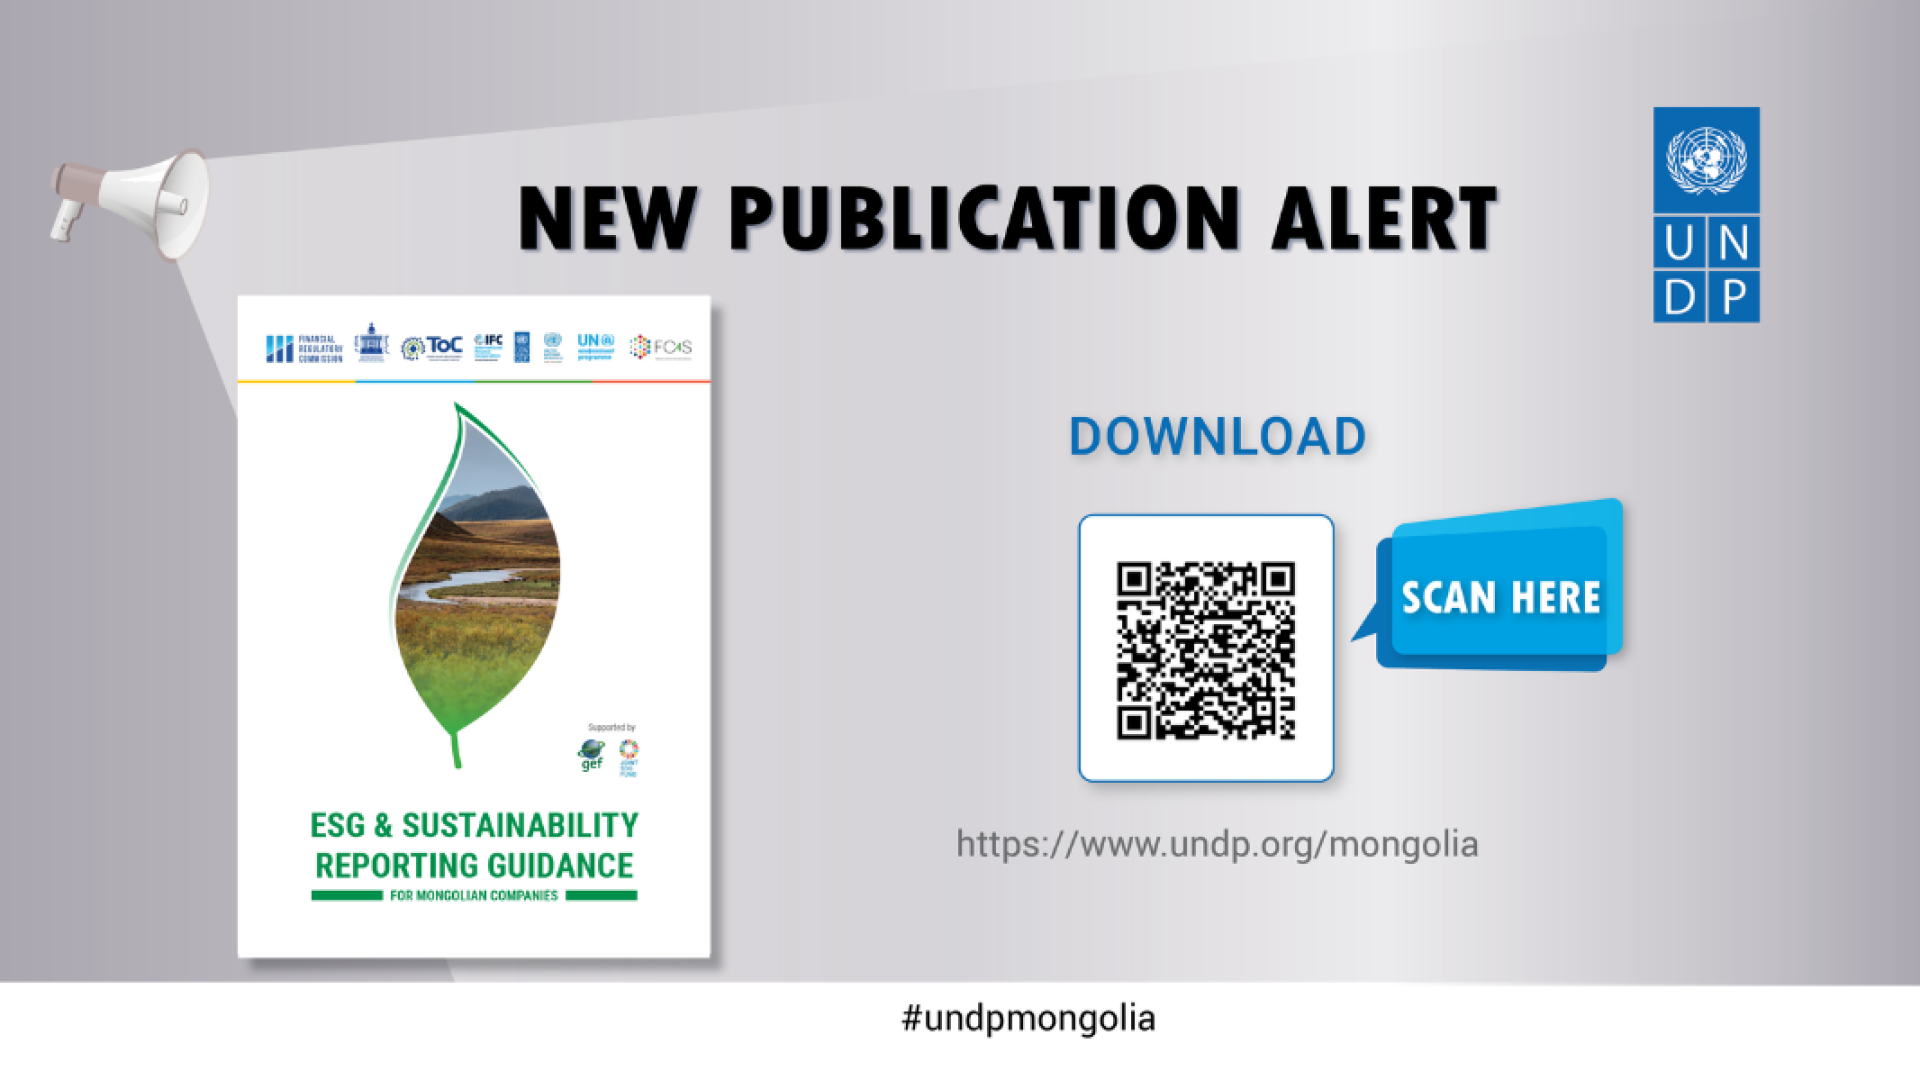 Mongolia launches guidelines on environmental, social and governance and sustainability reporting standards | United Nations Development Programme